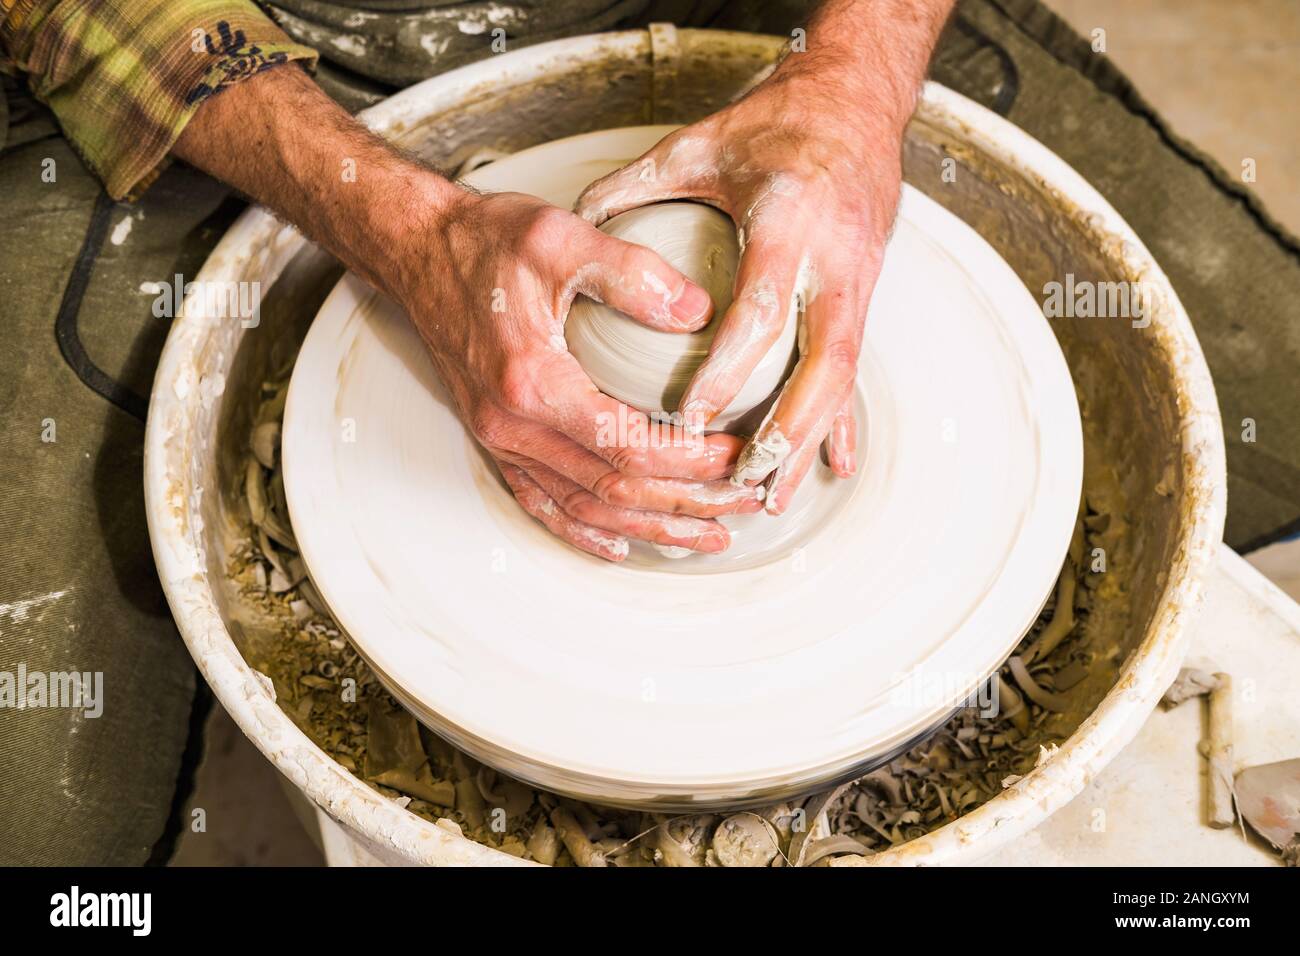 Potter making clay bowl or vase ceramics on the potter's wheel. Creating pottery art and handicraft modelling creation. Arms detail. Stock Photo